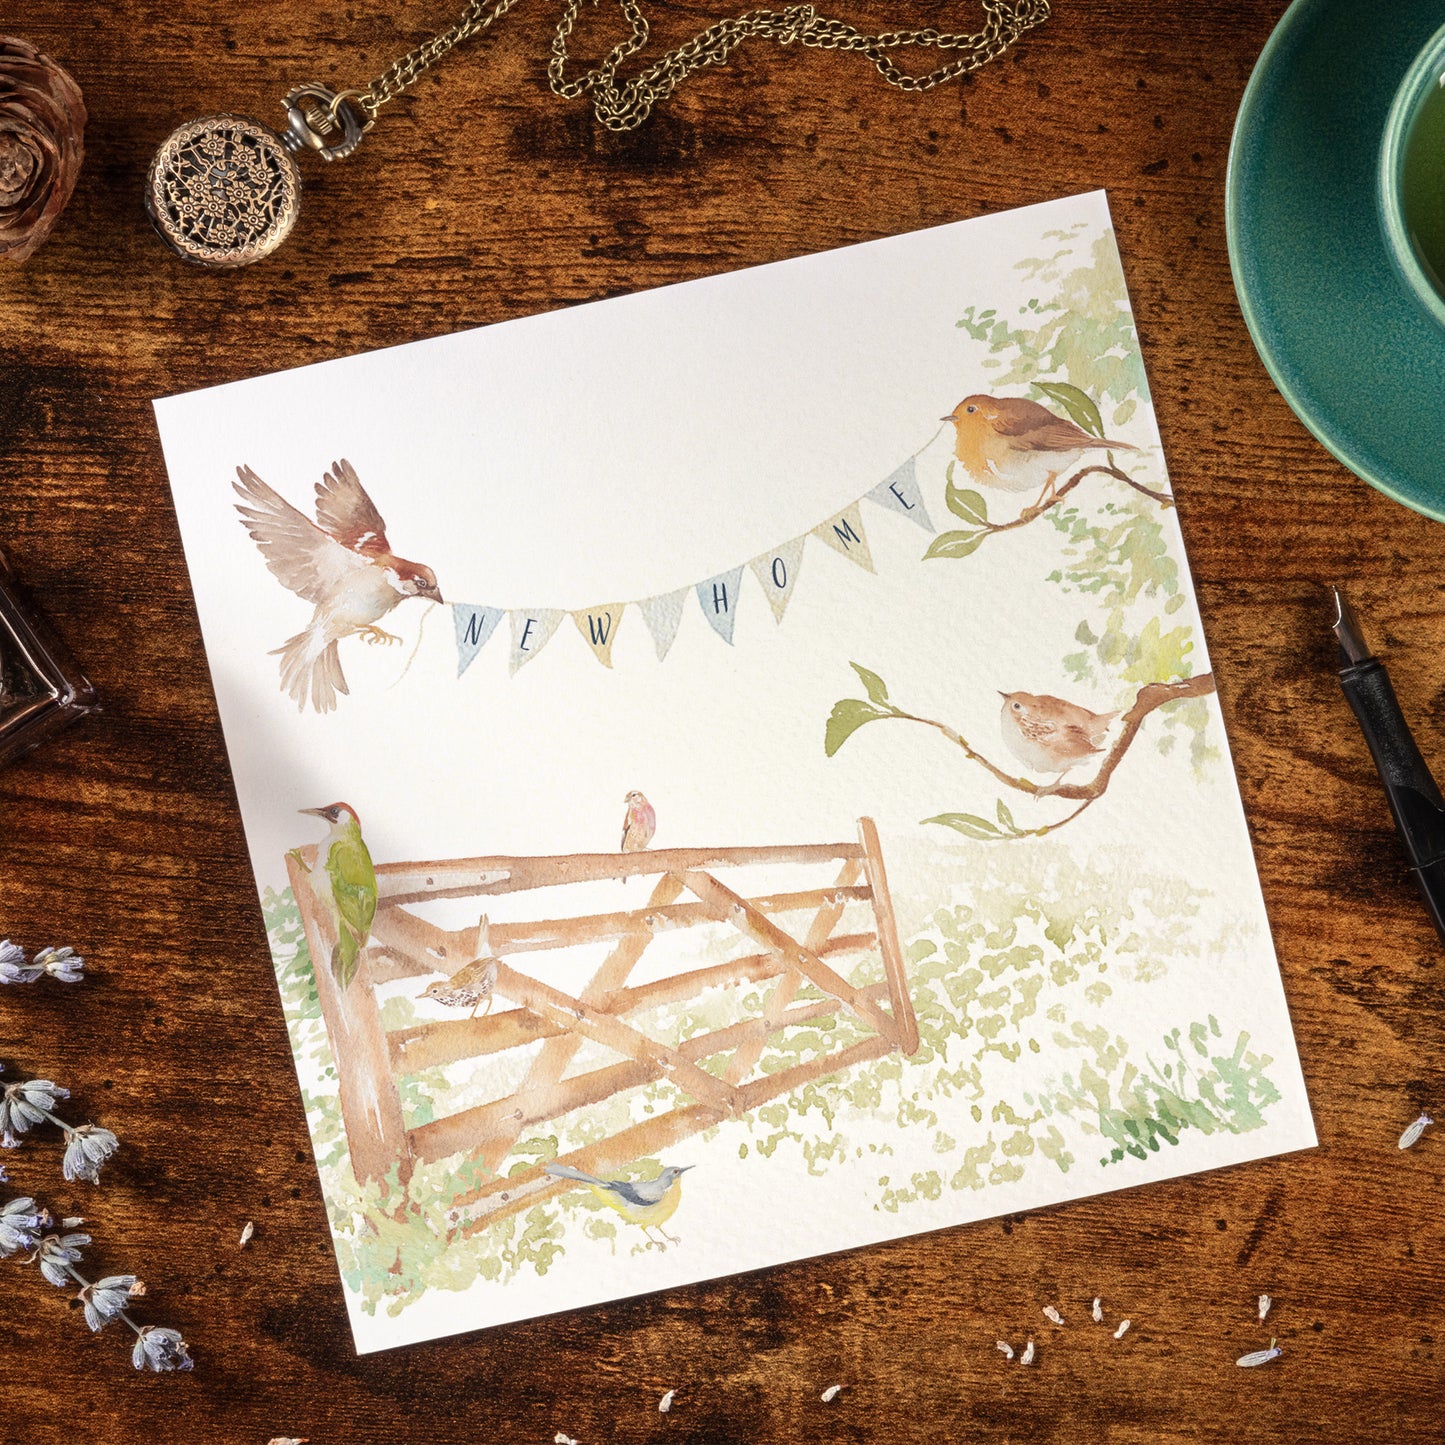 A greetings card laid flat on a table surrounded by writing items including a fountain pen and ink. The card reads New Home on bunting held by a sparrow and a robin above an open garden gate in a watercolour style.